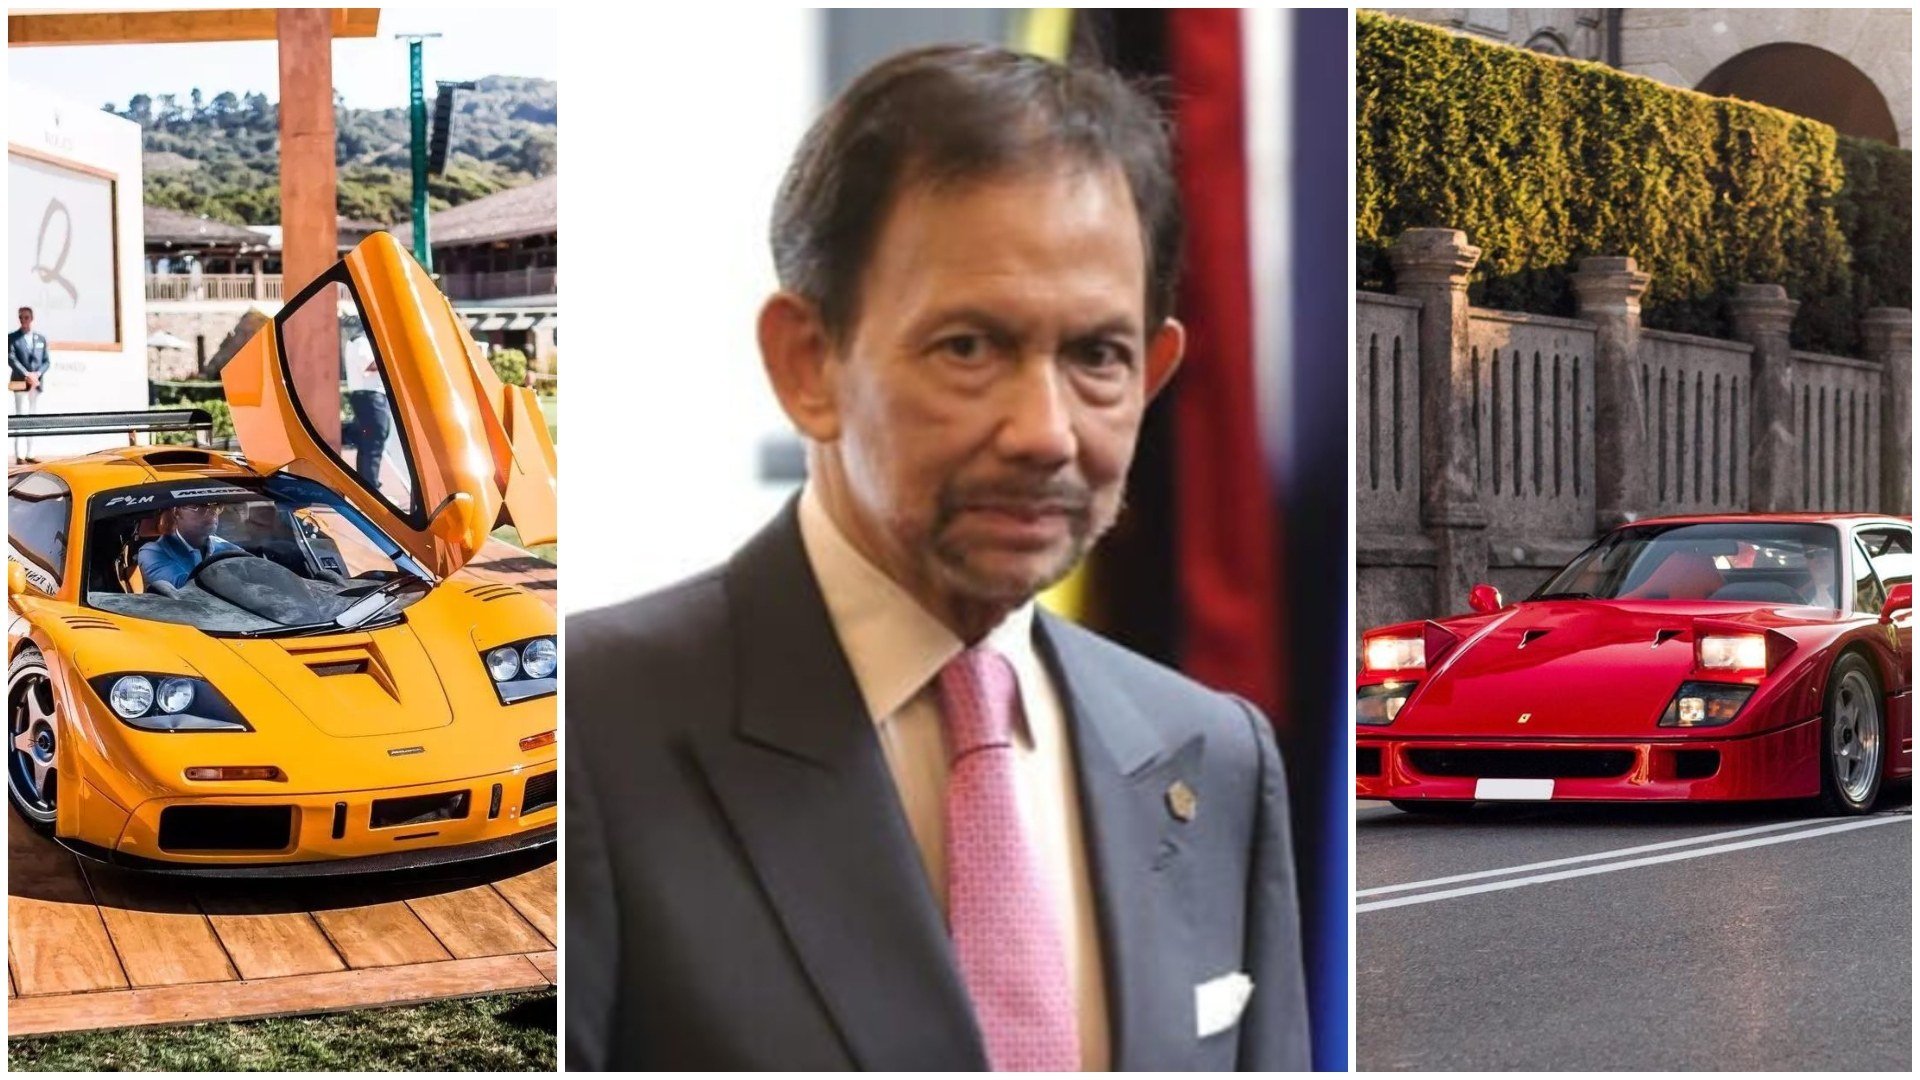 The Sultan of Brunei owns some impressive supercars, from a McLaren F1 LM to a Ferrari F40. Photos: @lore_supercars, @bruneiroyalfamily, @carskeen, @joshleap.s/Instagram